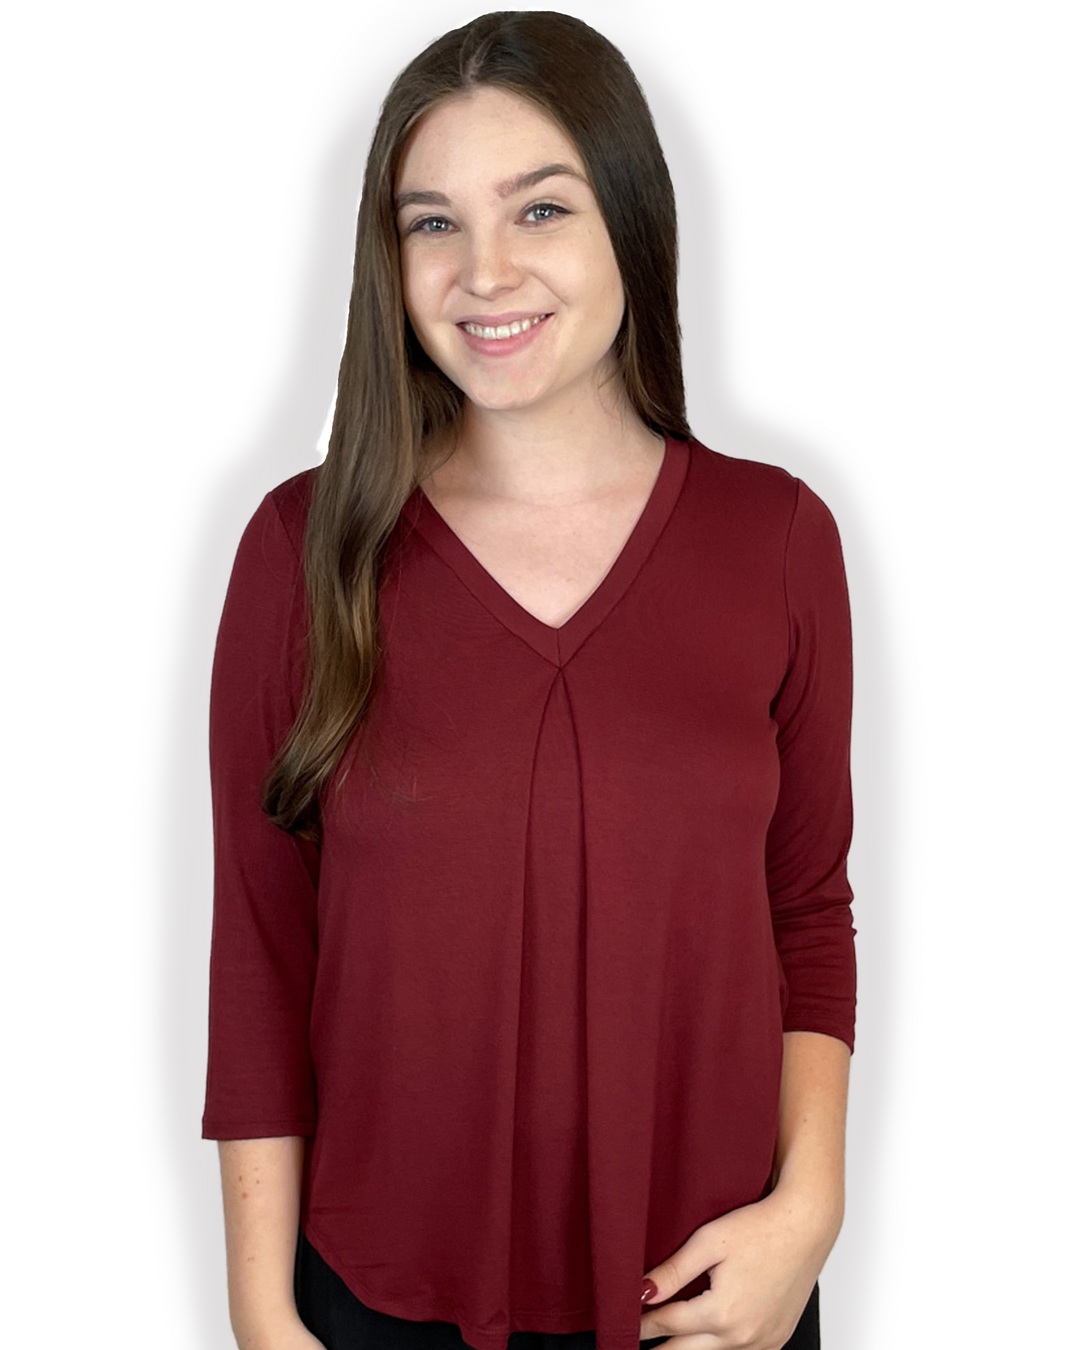 EILEEN Braless Bamboo 3/4 Sleeve Top with center inverted pleat design in maroon color front view